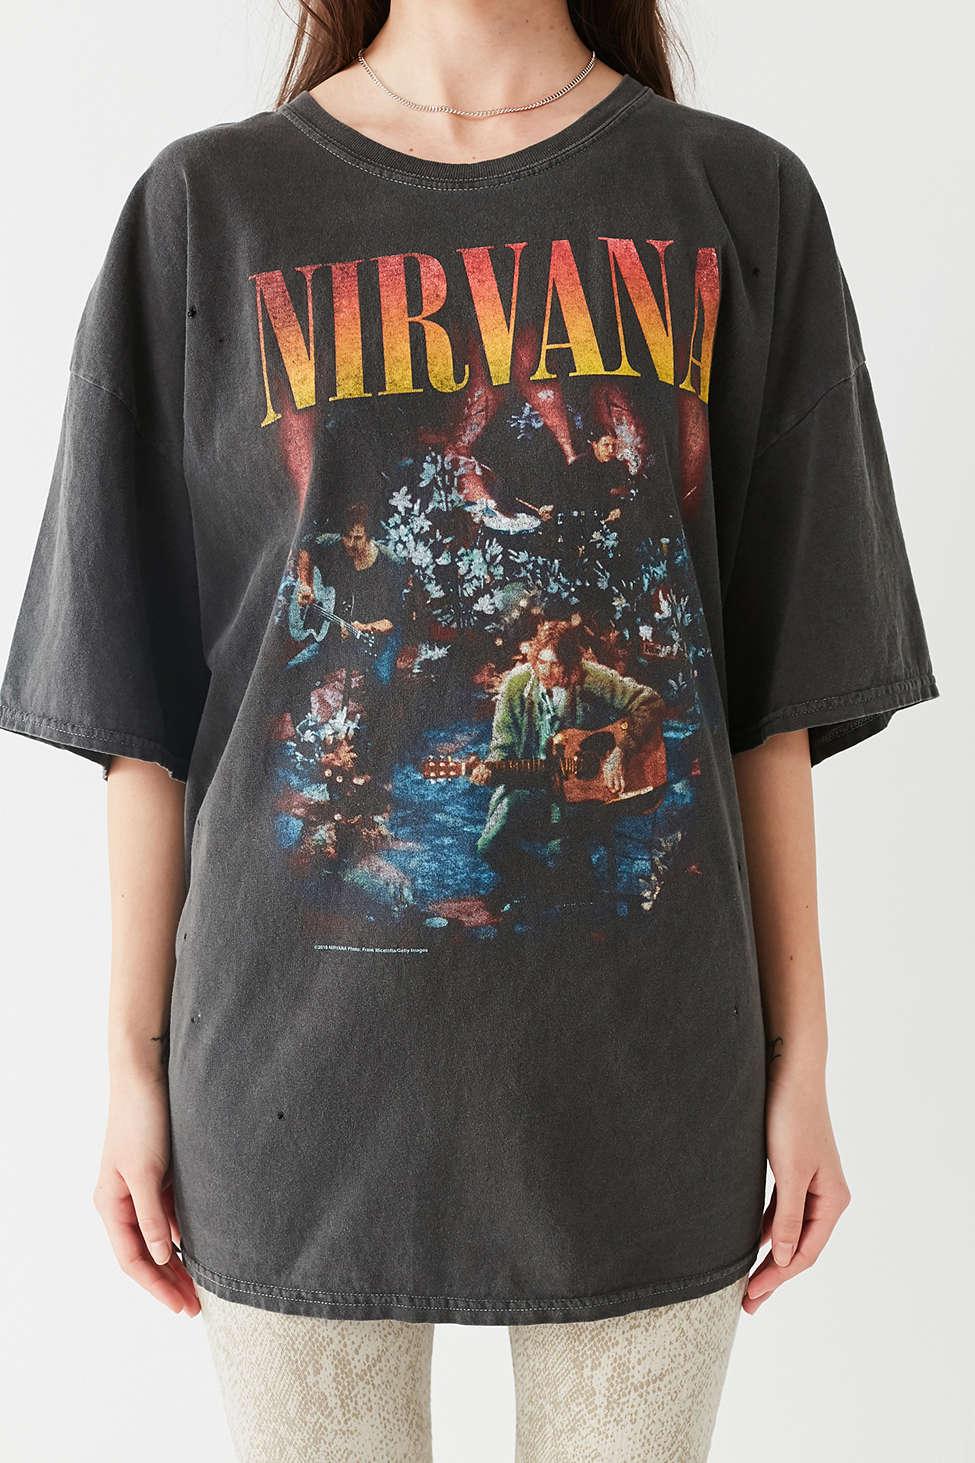 Urban Outfitters Cotton Nirvana Unplugged T-shirt Dress in Black Lyst